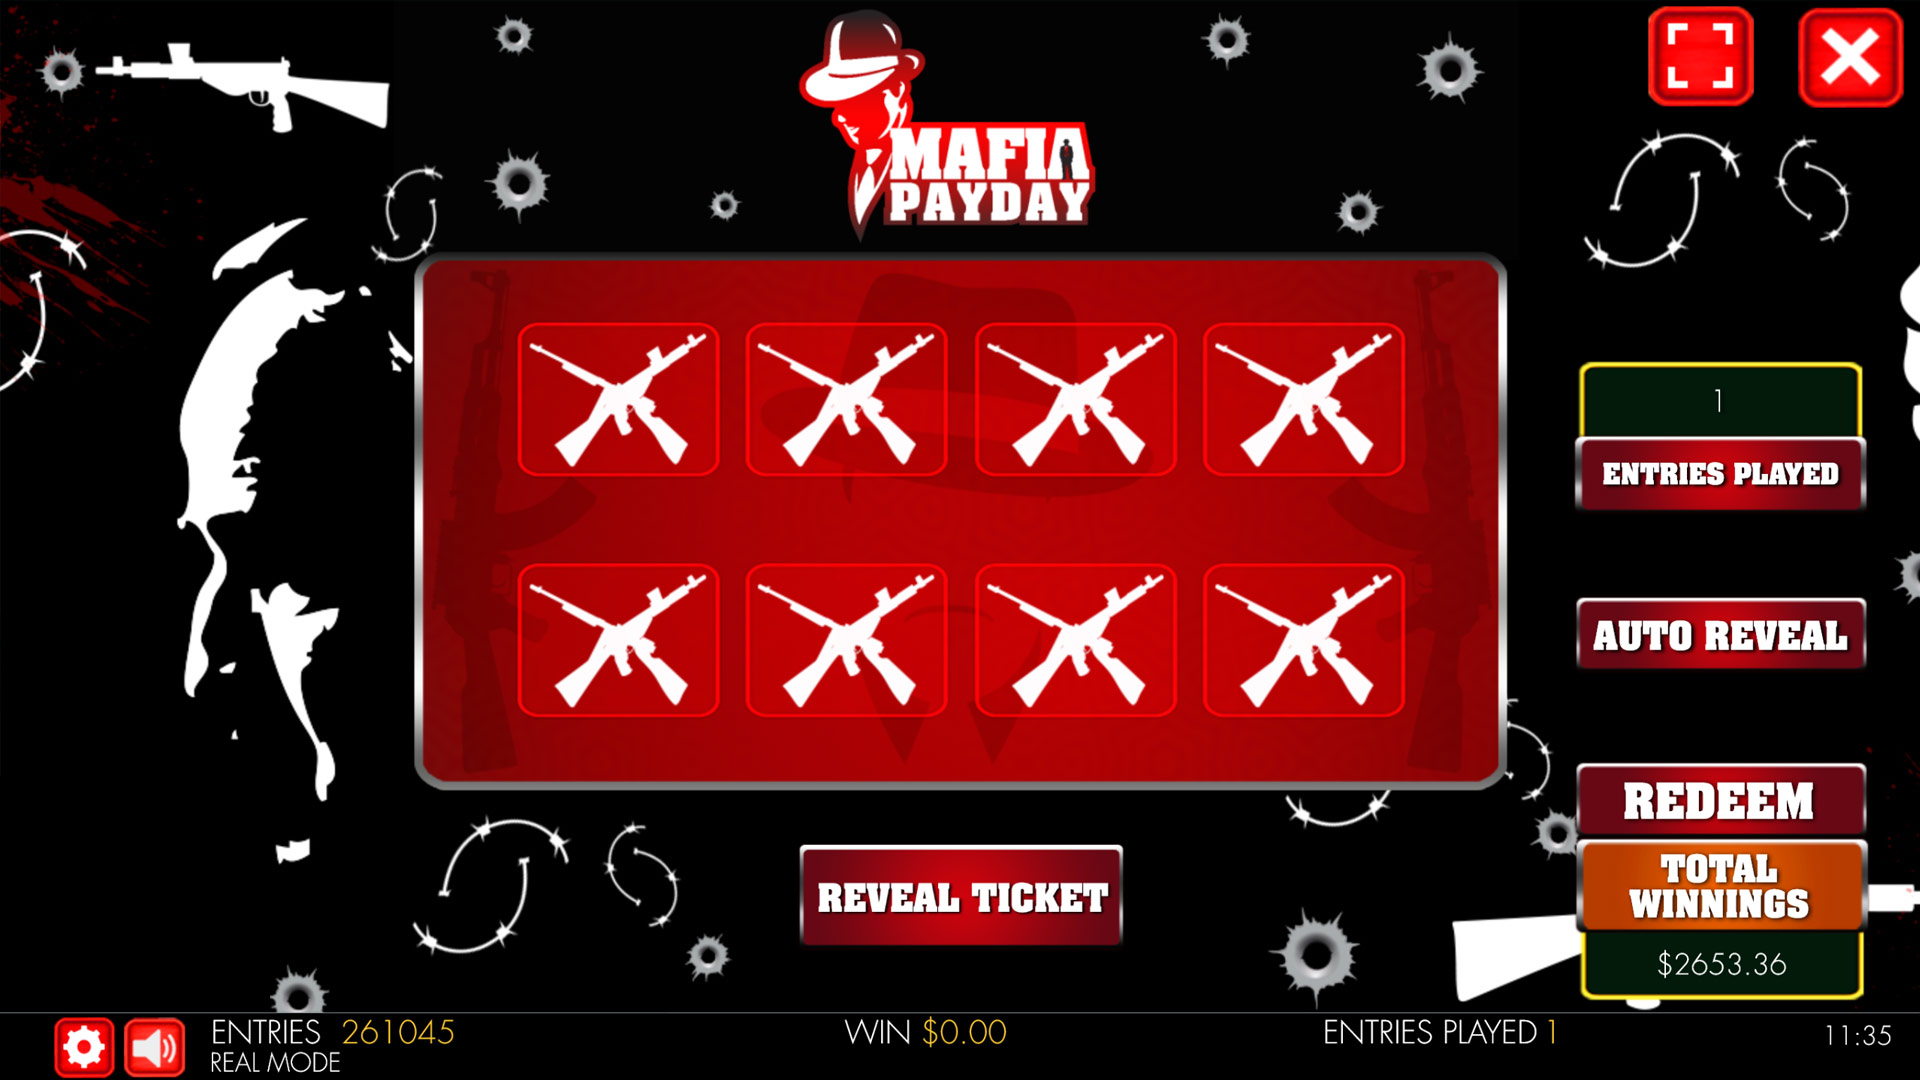 Mafia Payday Scratch Card Mobile and PC Preview Pic Main Screen 1